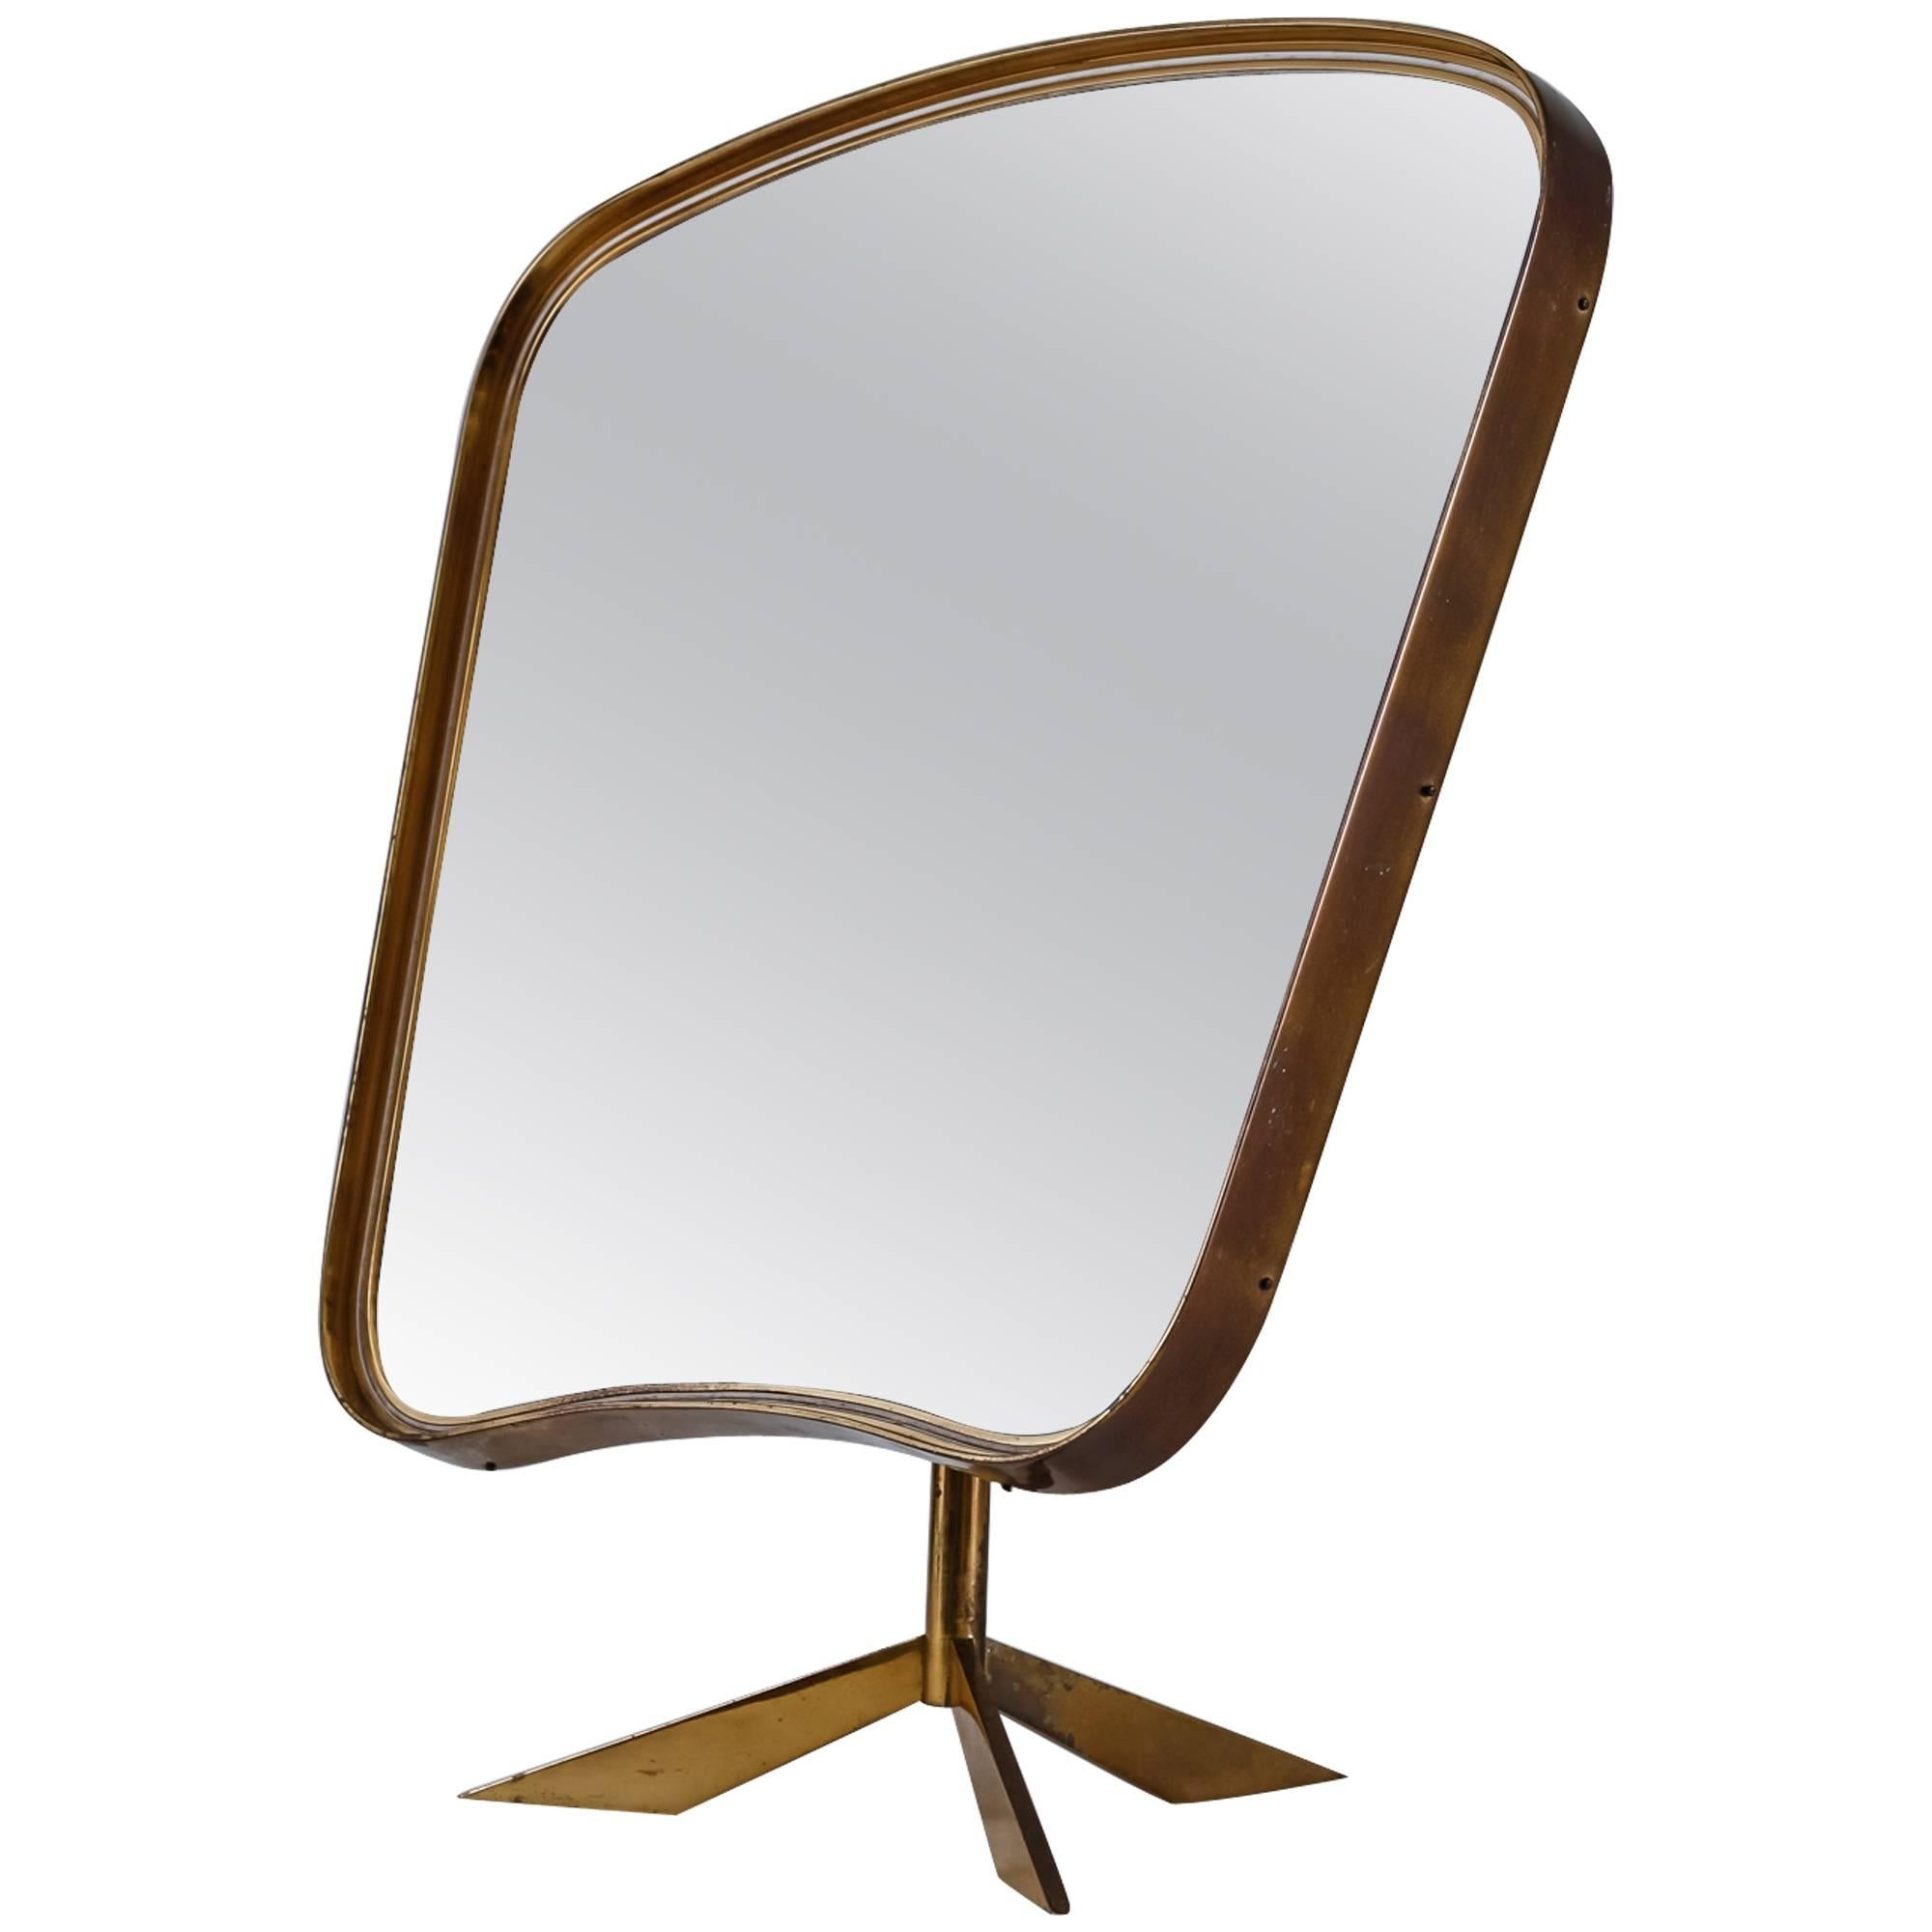 Brass console mirror on tripod foot, Germany, 1950s